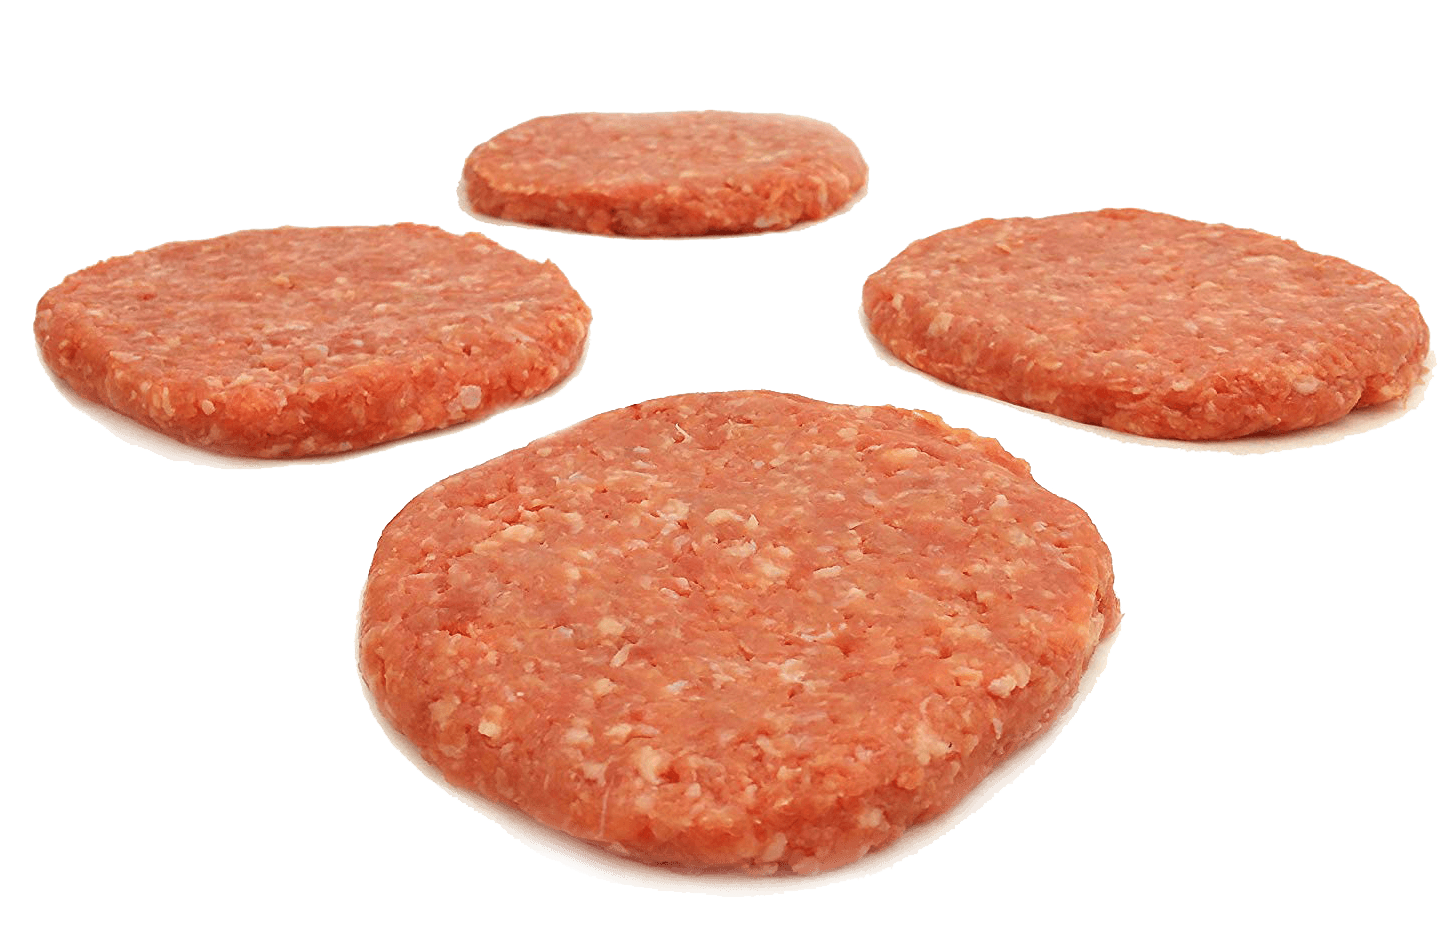 Fresh Local Meat Delivery - 4 Nature Veal Burgers All Natural 1 Pound